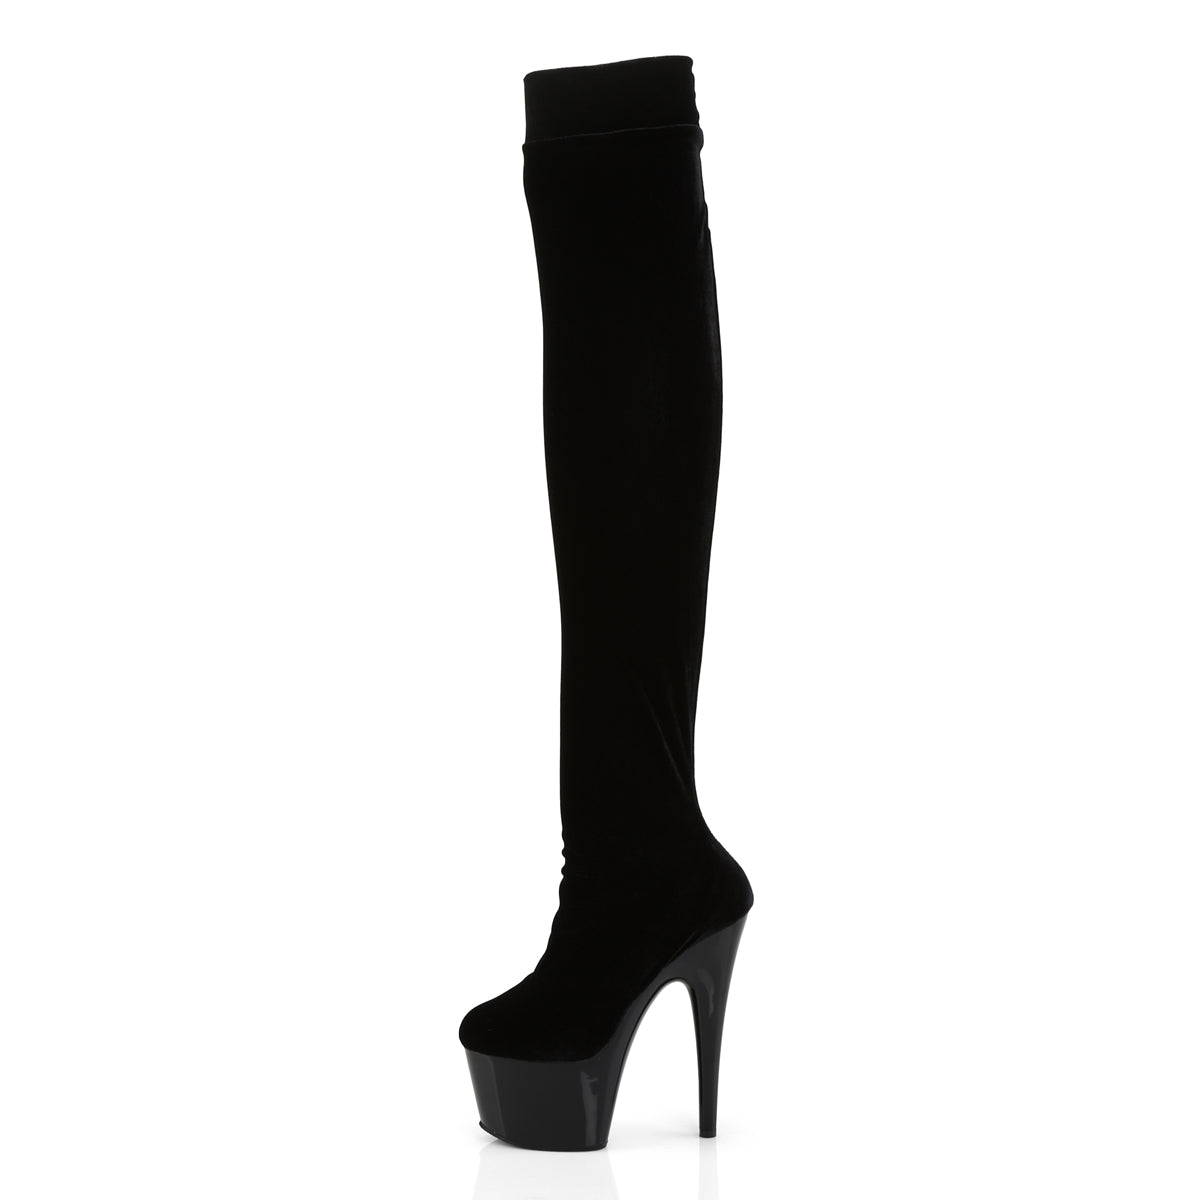 ADORE-3002/B/VEL 7" PLEASER FAST DELIVERY 24-48h